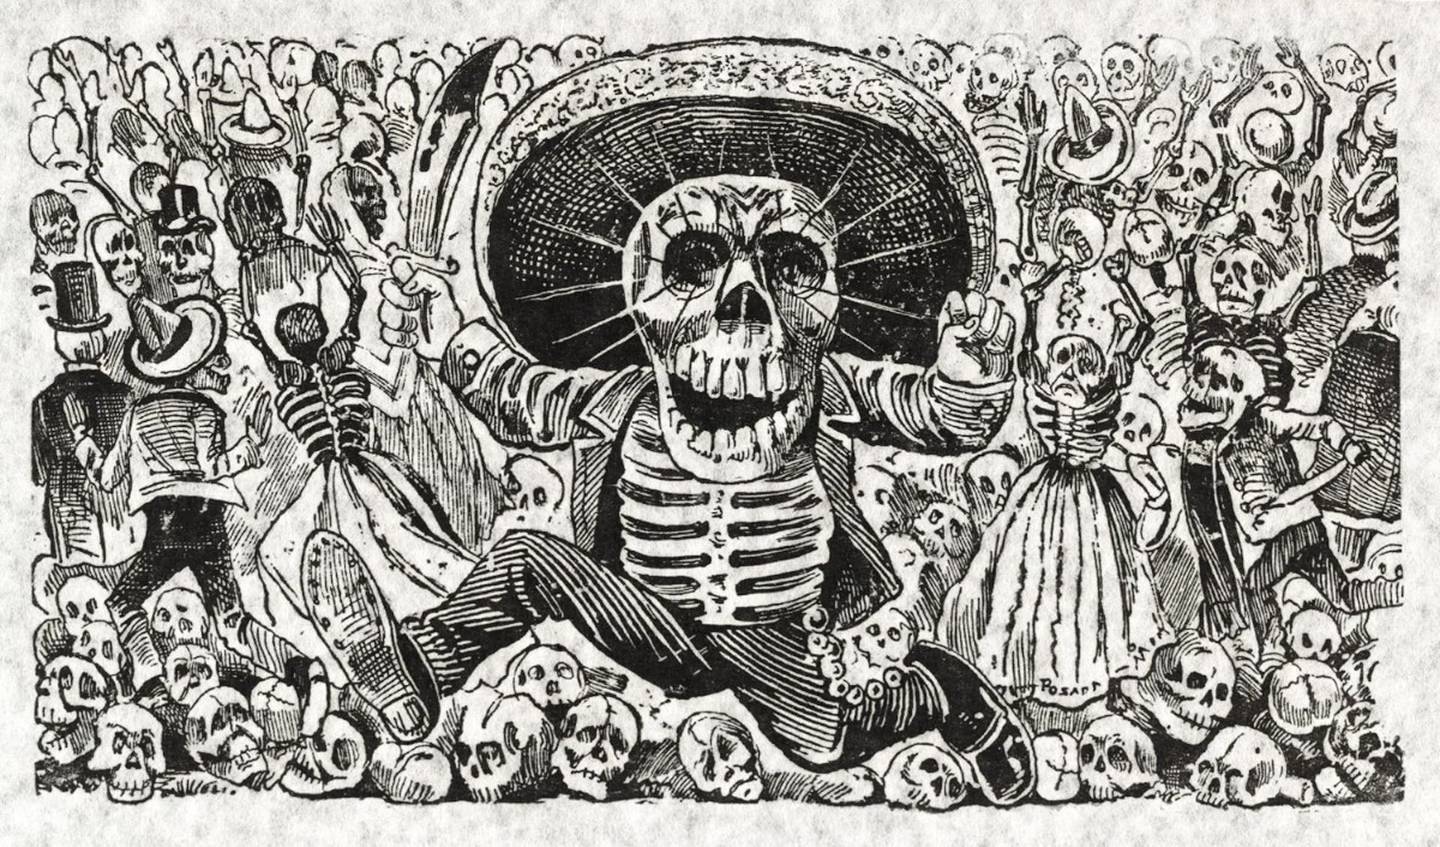 The skeletons come out of the closet in José Guadalupe Posada: Legendary Printmaker of Mexico at the Mitchell Gallery in Annapolis through Oct. 21.